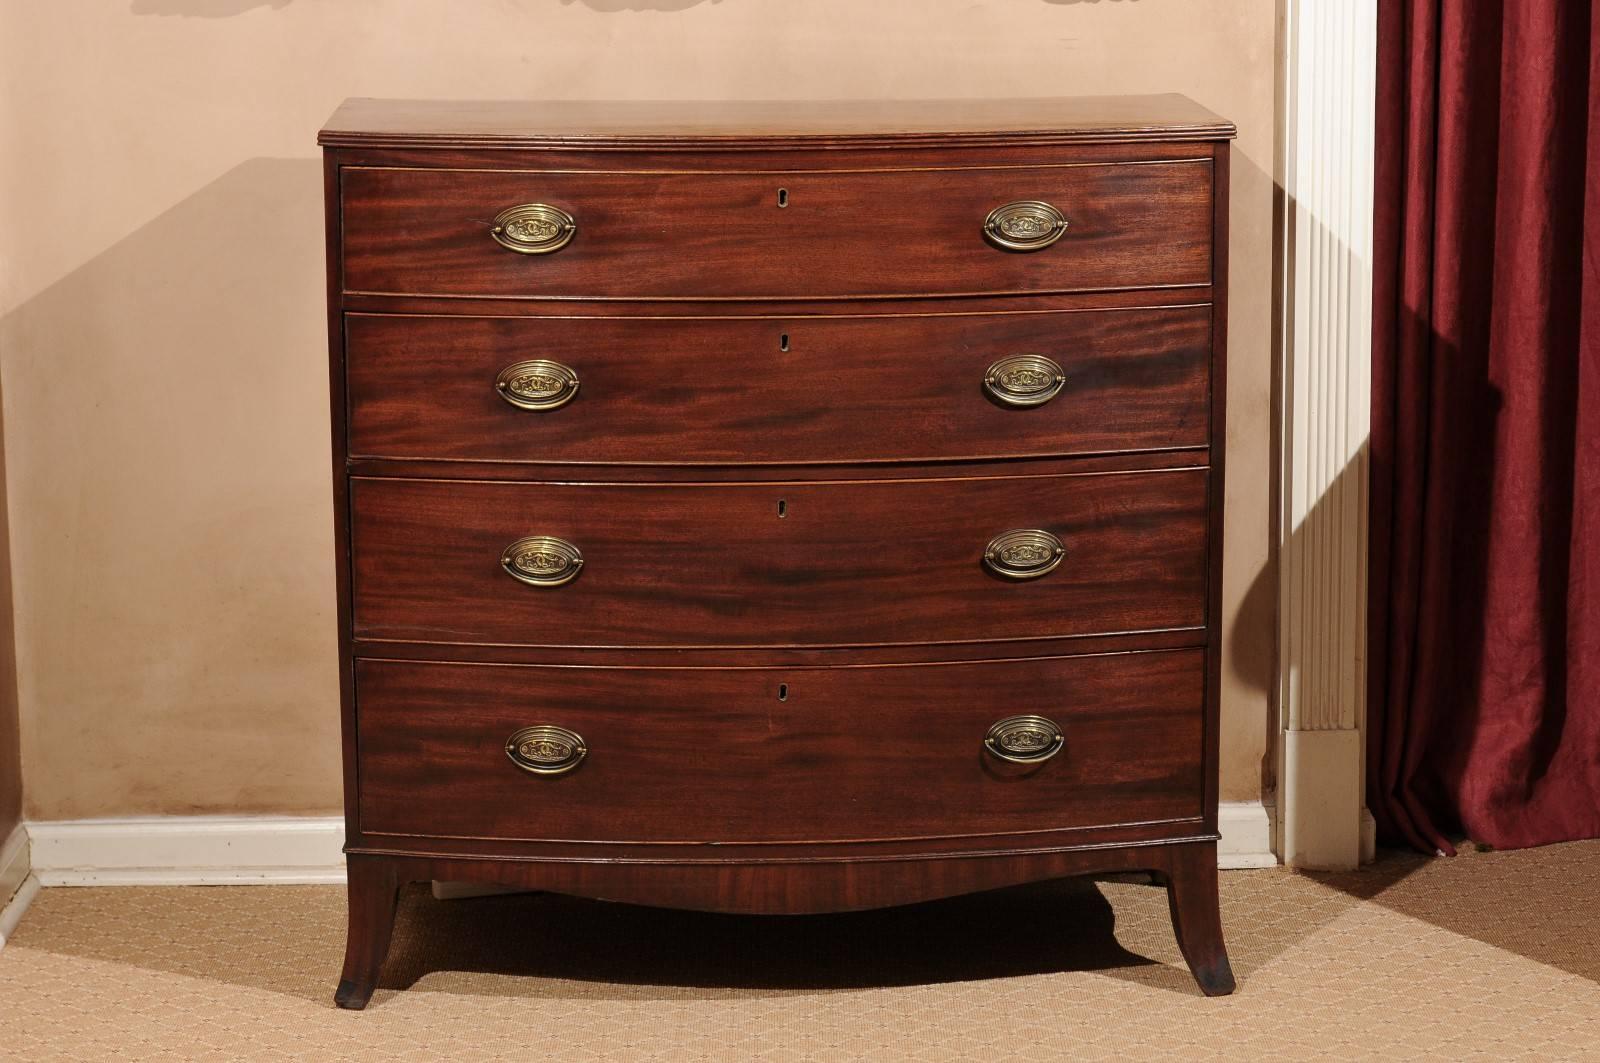 A four-drawer mahogany chest of drawers supported by splayed feet.
Very pretty hardware.